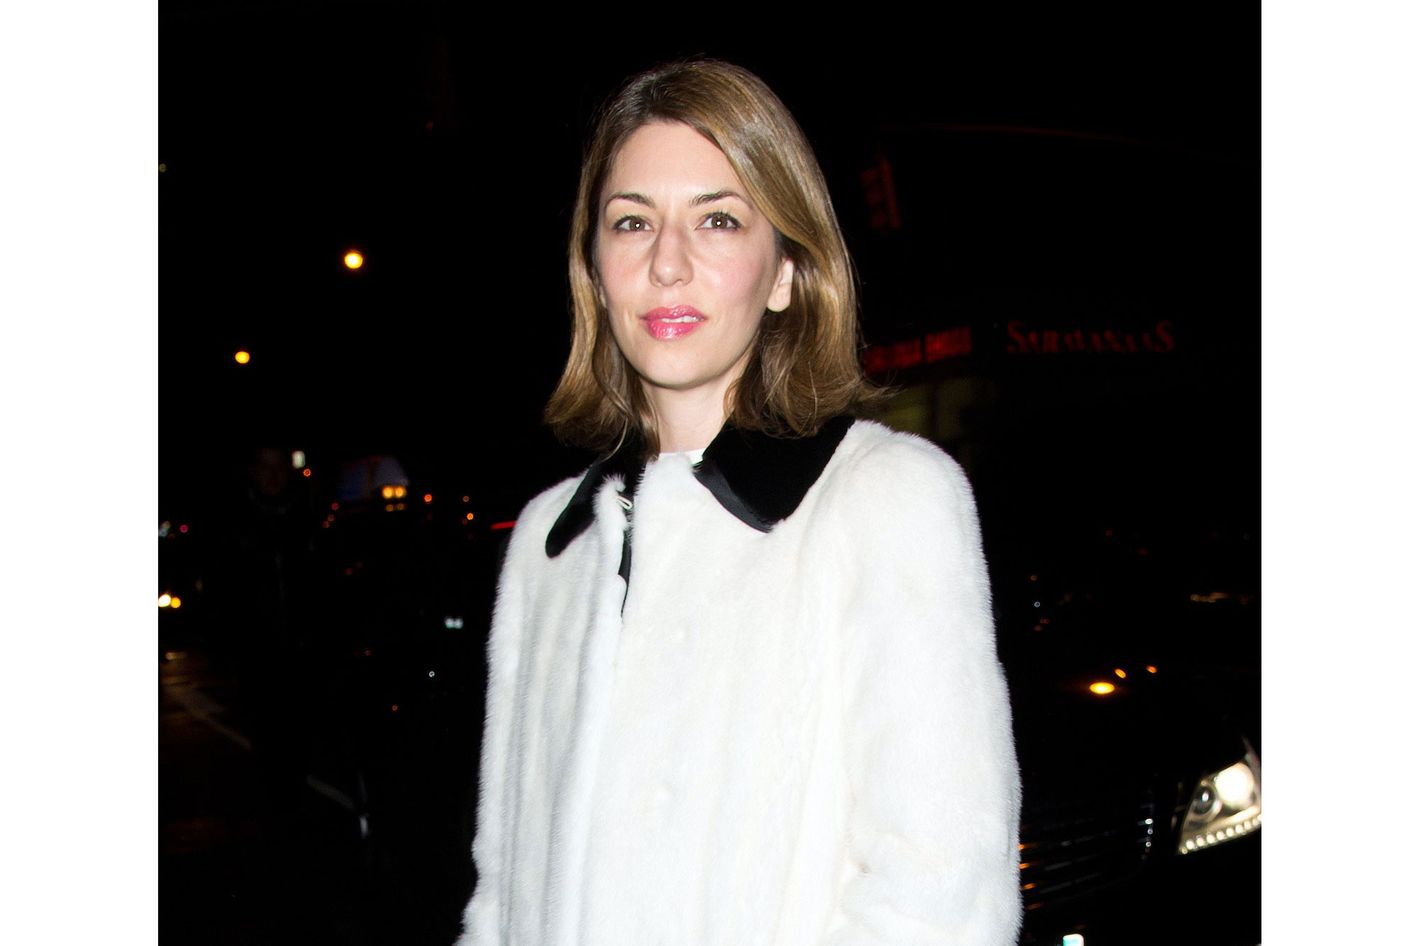 Sofia Coppola is seen wearing black and white faux fur collar coat